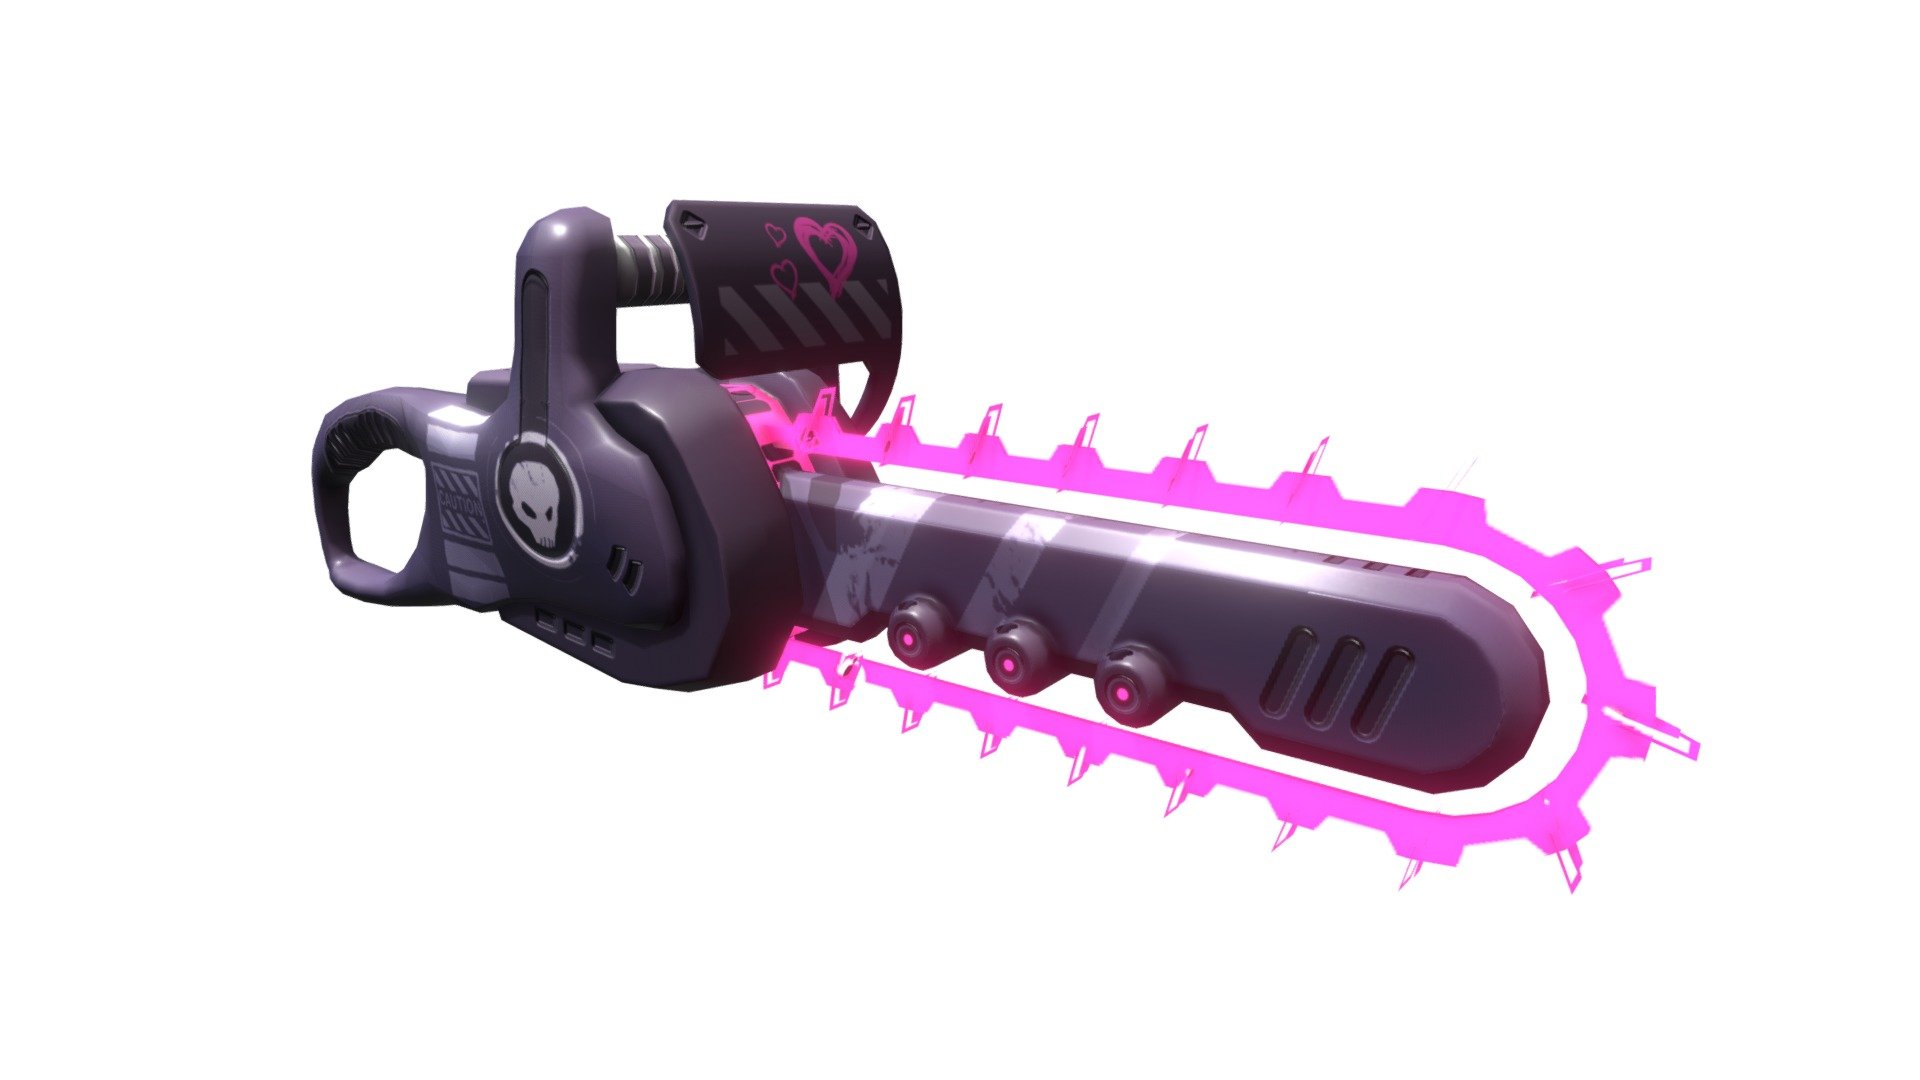 Exclusive weapon Item for Vithar. Check it out!

https://sketchfab.com/models/ab91b5aa147f470eb548040db4f7b335?ref=related - Vithar's Laser Chainsaw - 3D model by Luís Cherubini (@luischerub) 3d model